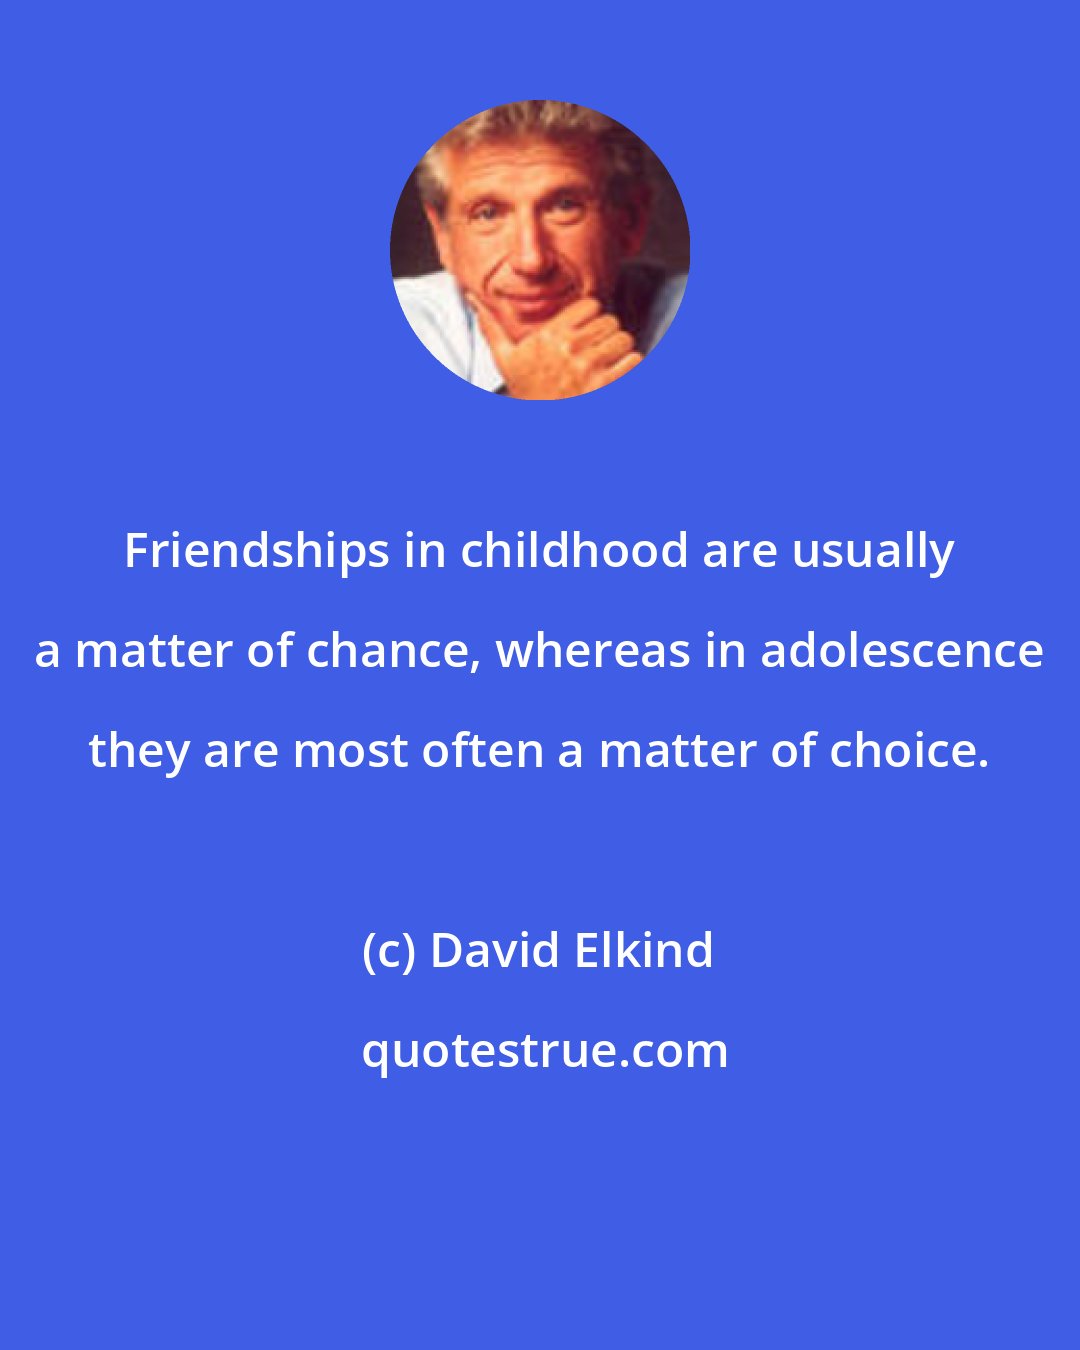 David Elkind: Friendships in childhood are usually a matter of chance, whereas in adolescence they are most often a matter of choice.